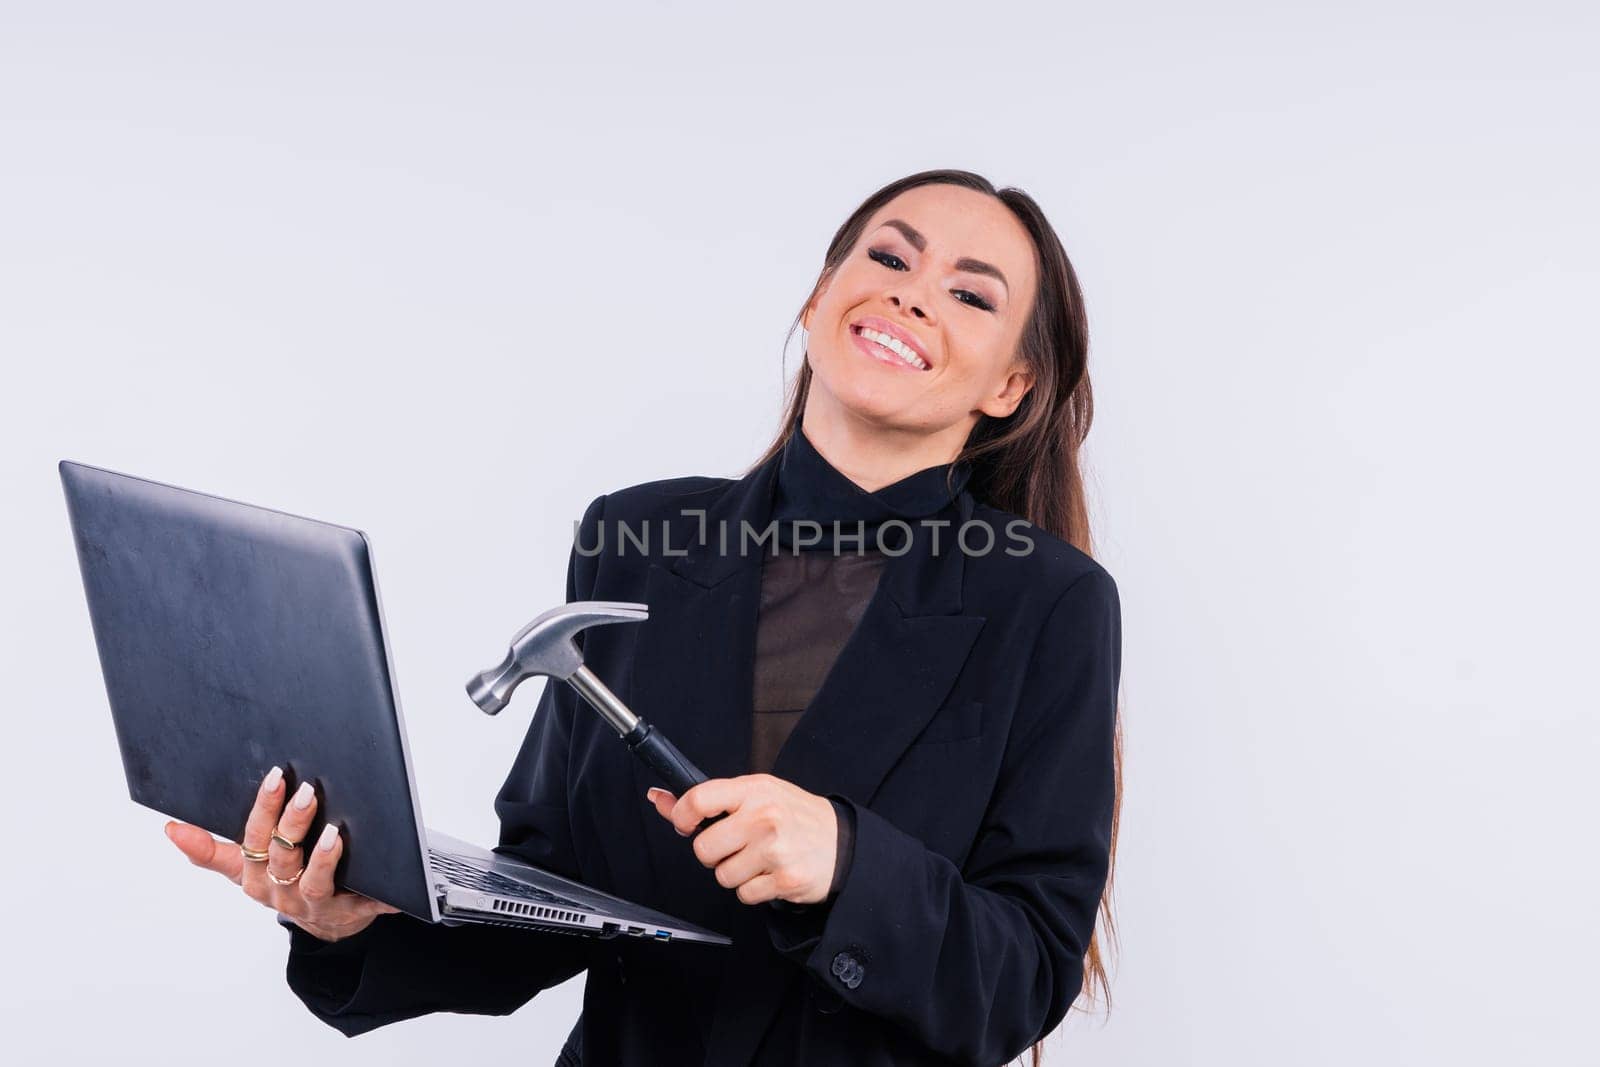 Attractive woman wearing business suit with computer angry facial expression holding hammer